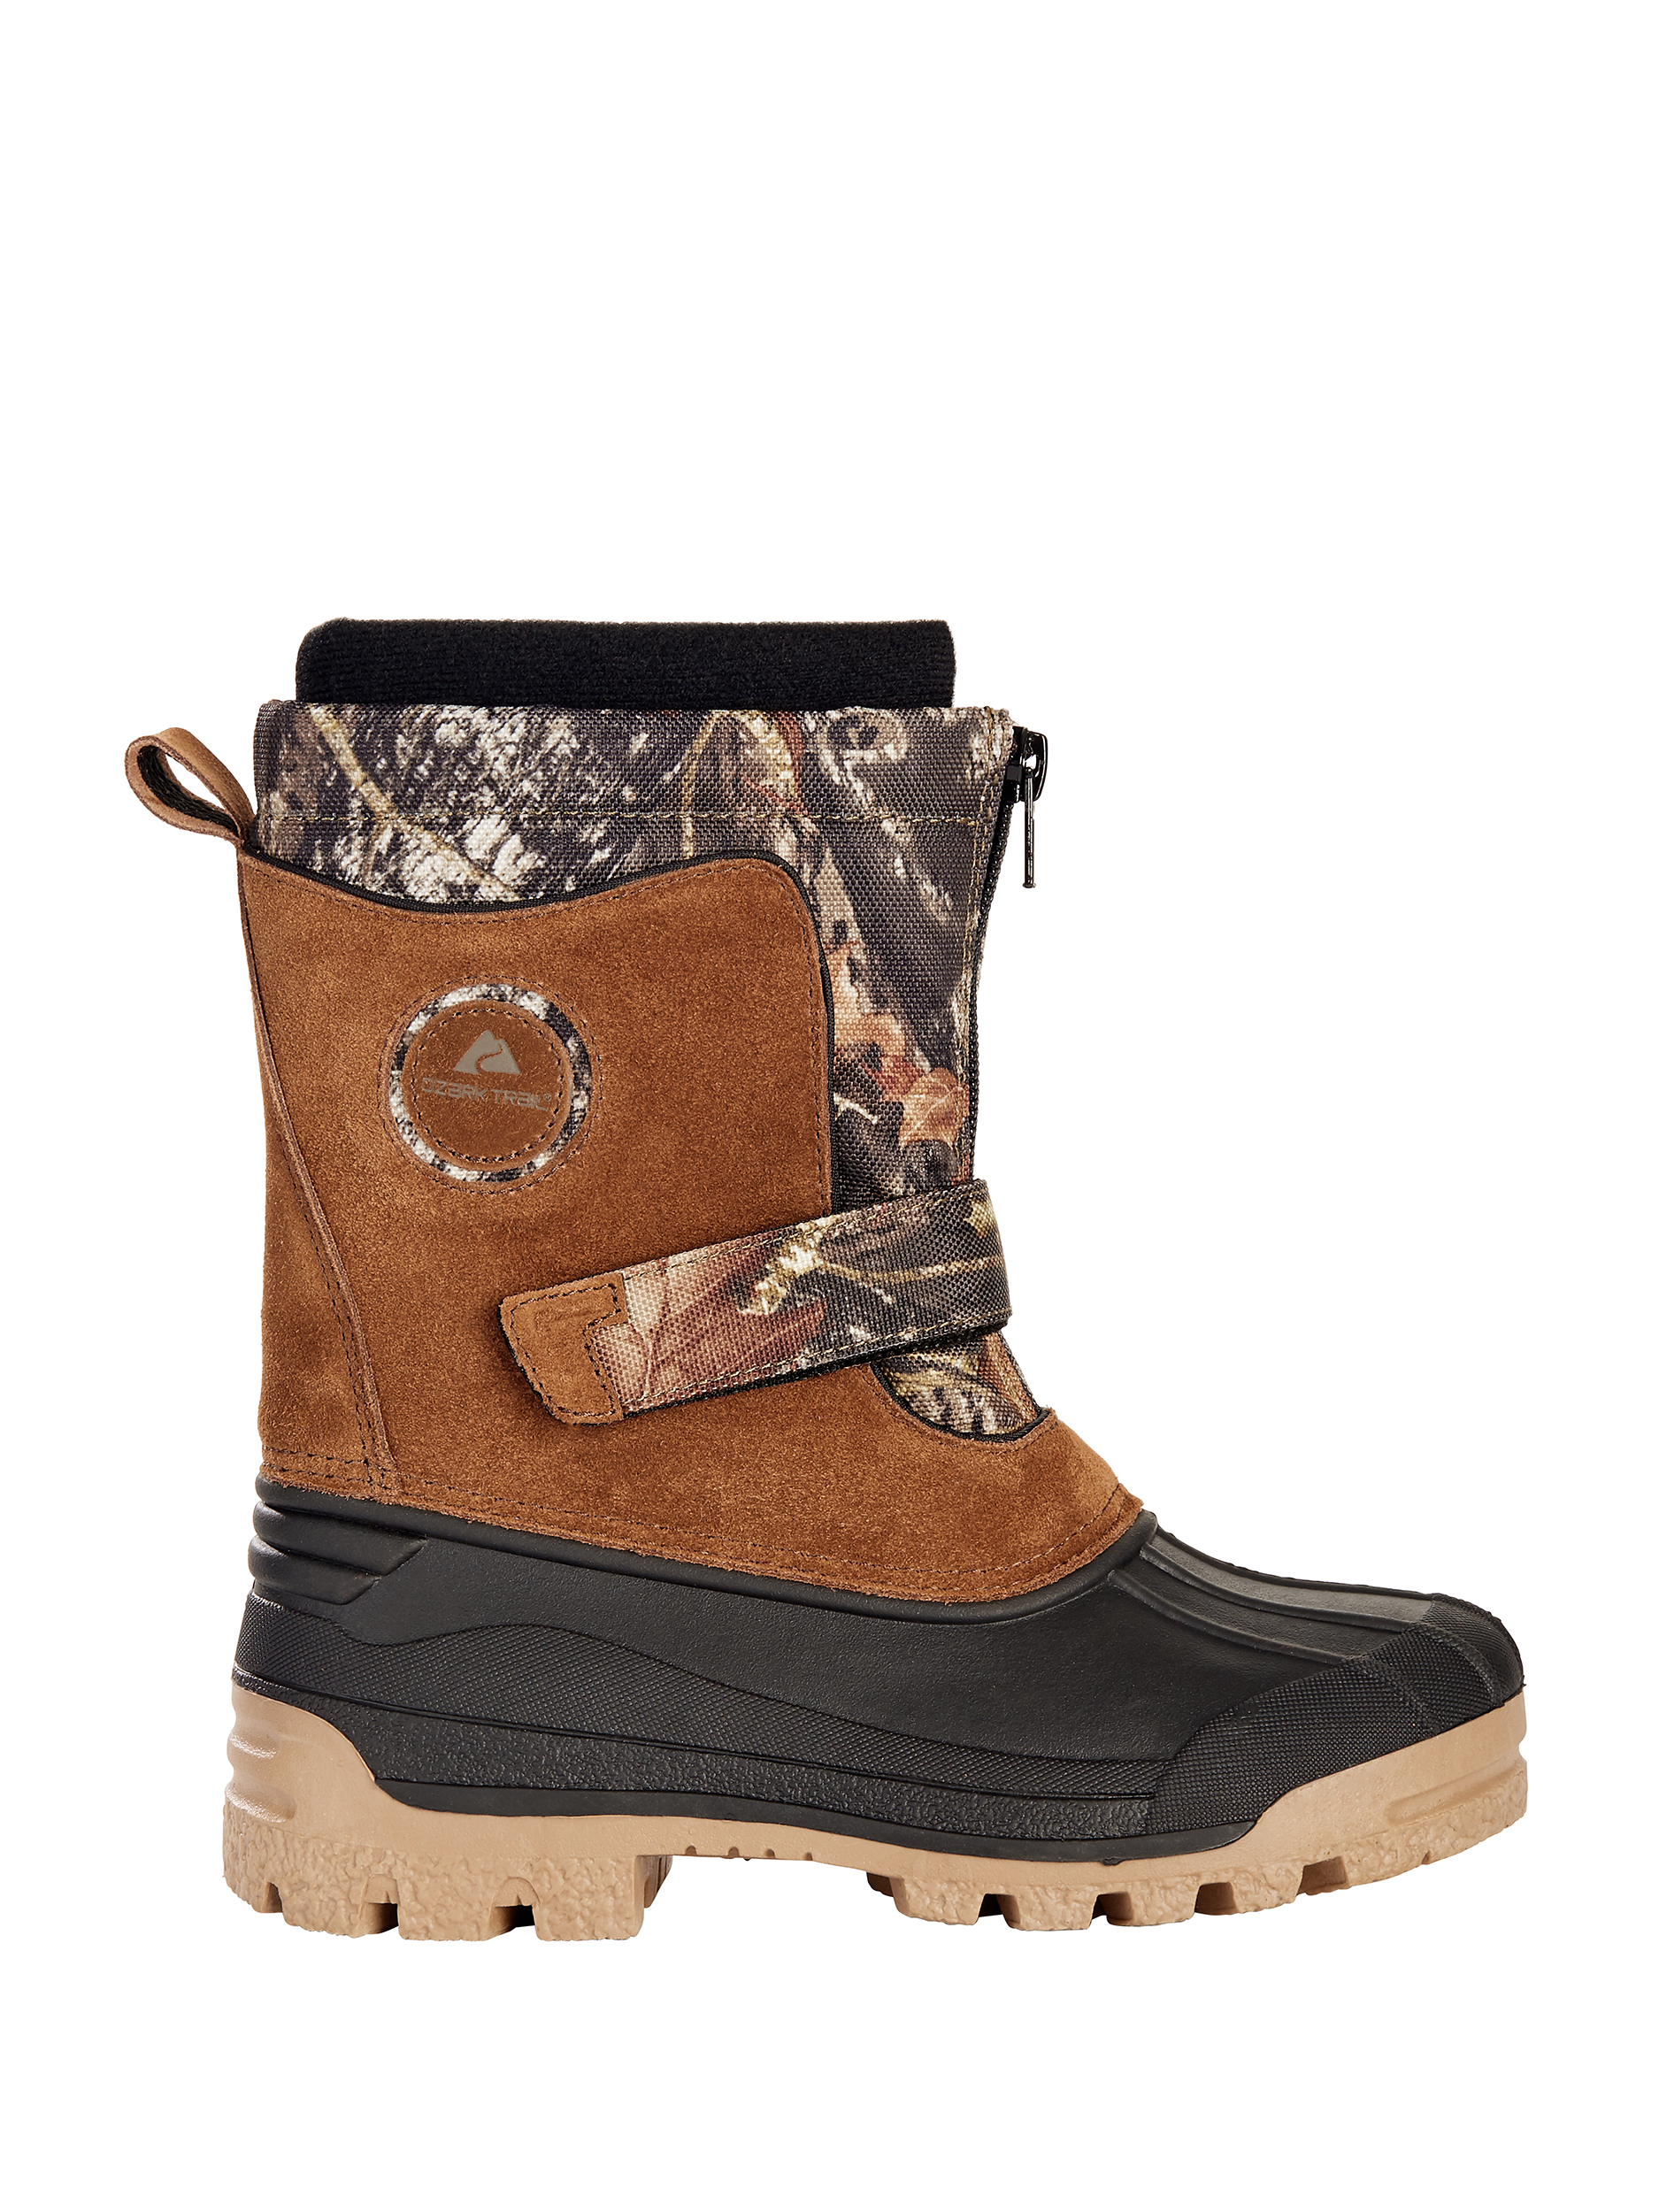 Ozark Trail Toddler Boys Temp Rated Camo Winter Boot - image 3 of 6